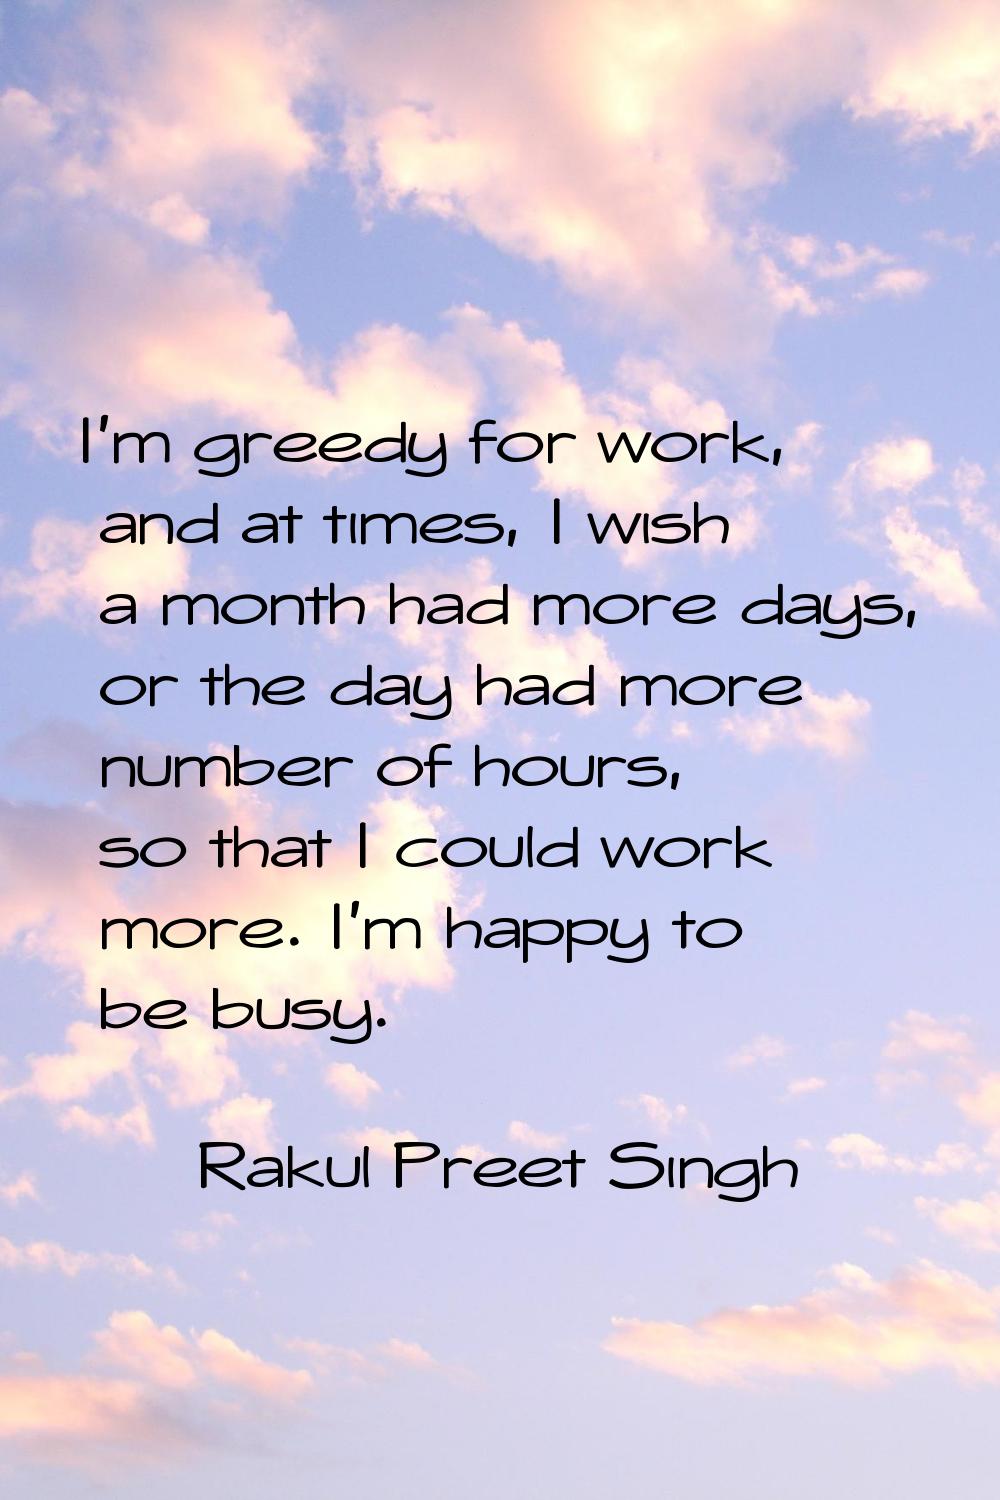 I'm greedy for work, and at times, I wish a month had more days, or the day had more number of hour